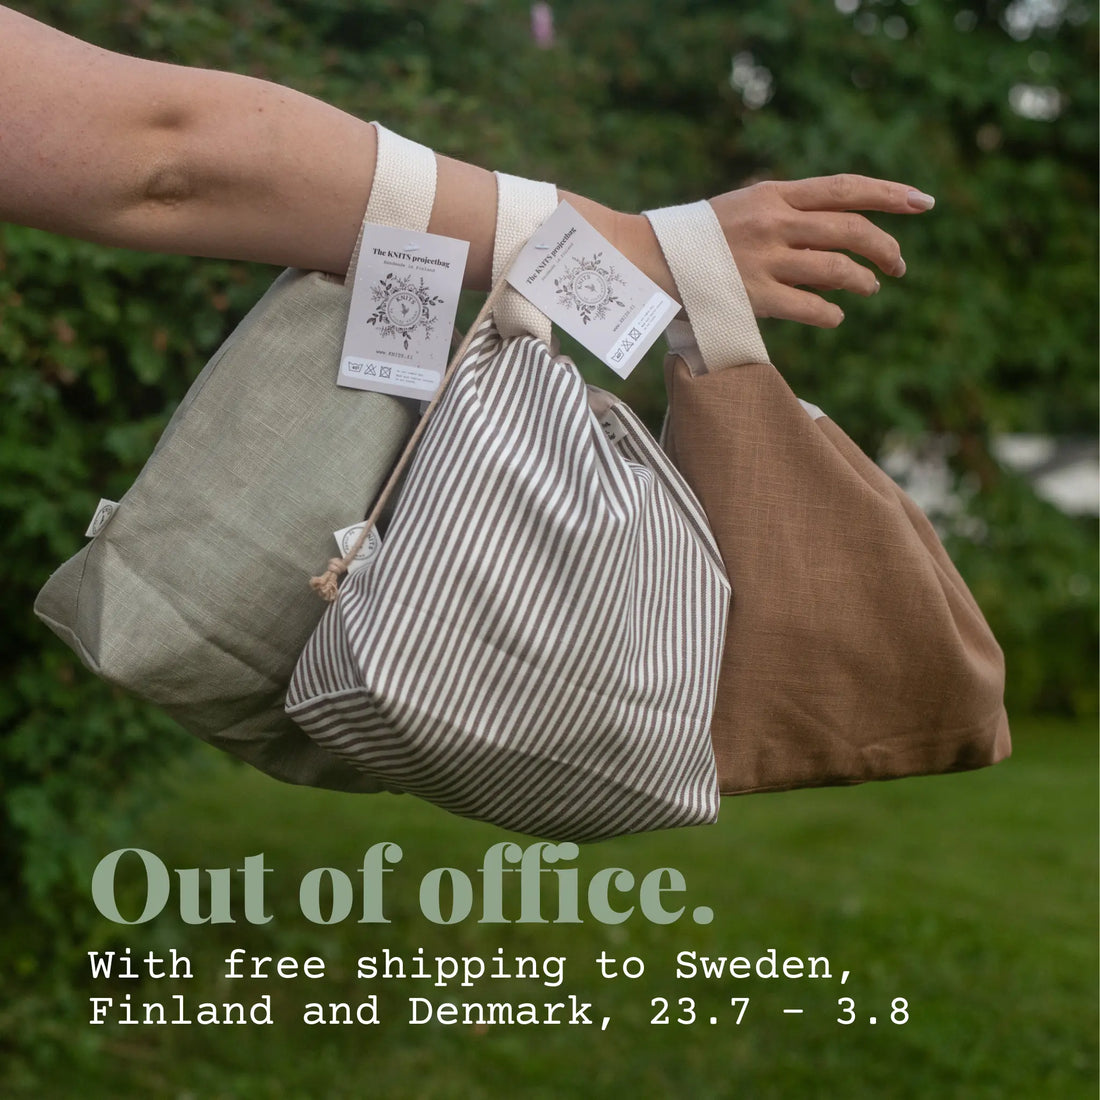 Out-of-office KNITS by cindy ekman